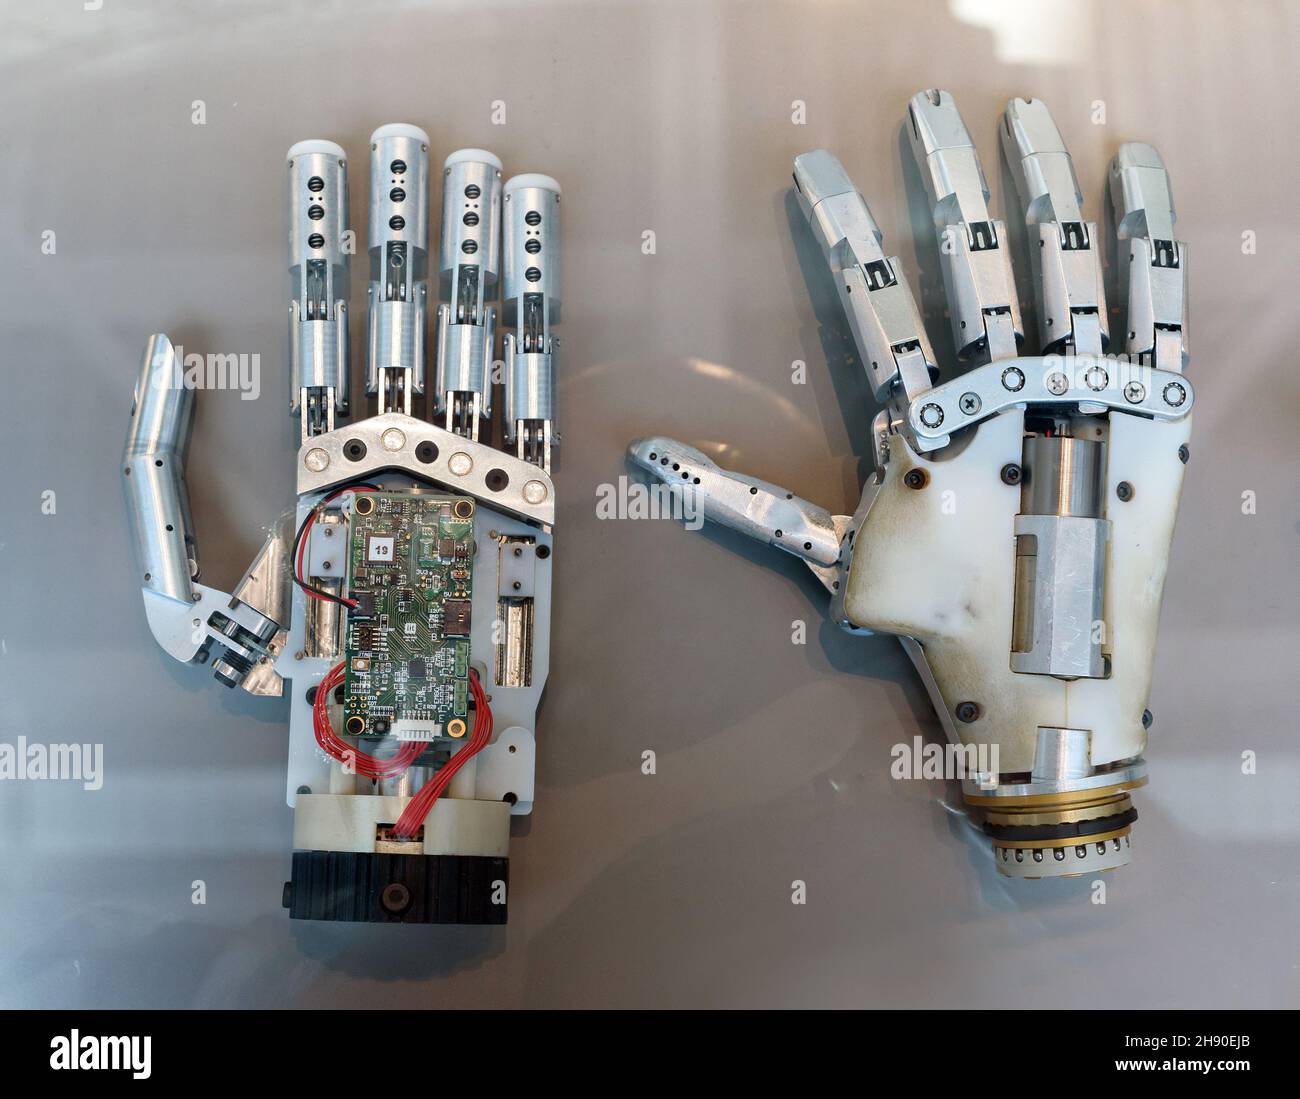 Top view of modern bionic mind controlled robotic prosthetic human hands for amputees placed on gray surface Stock Photo